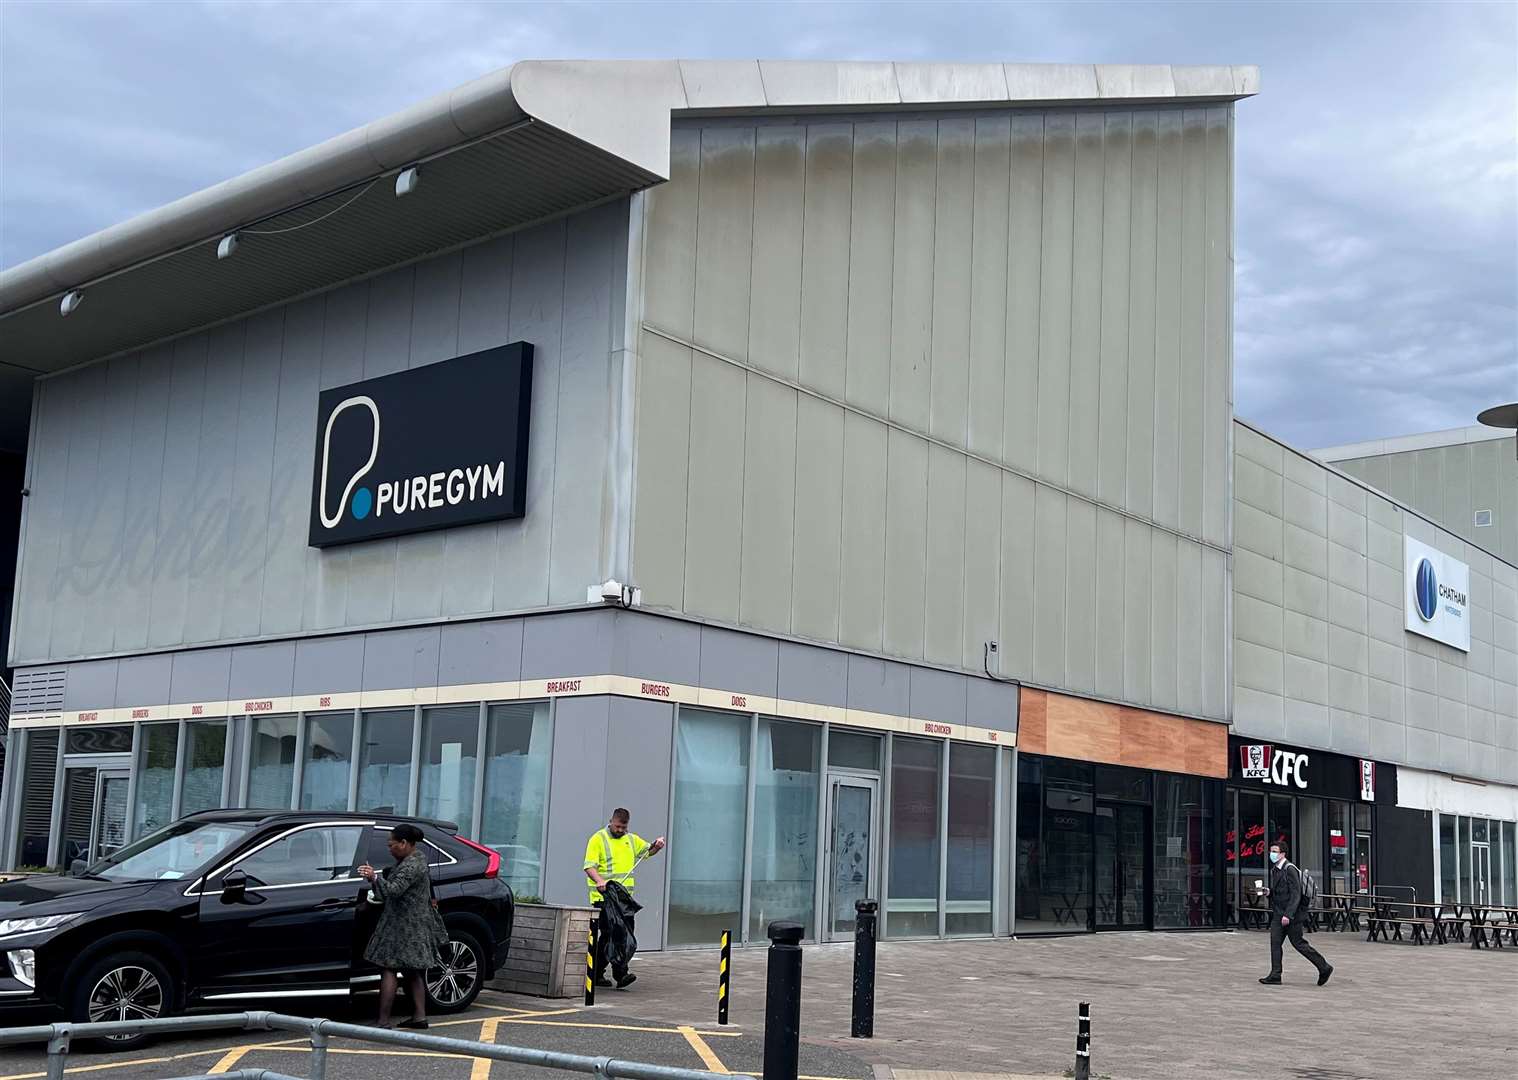 PureGym members will get three hours parking for free